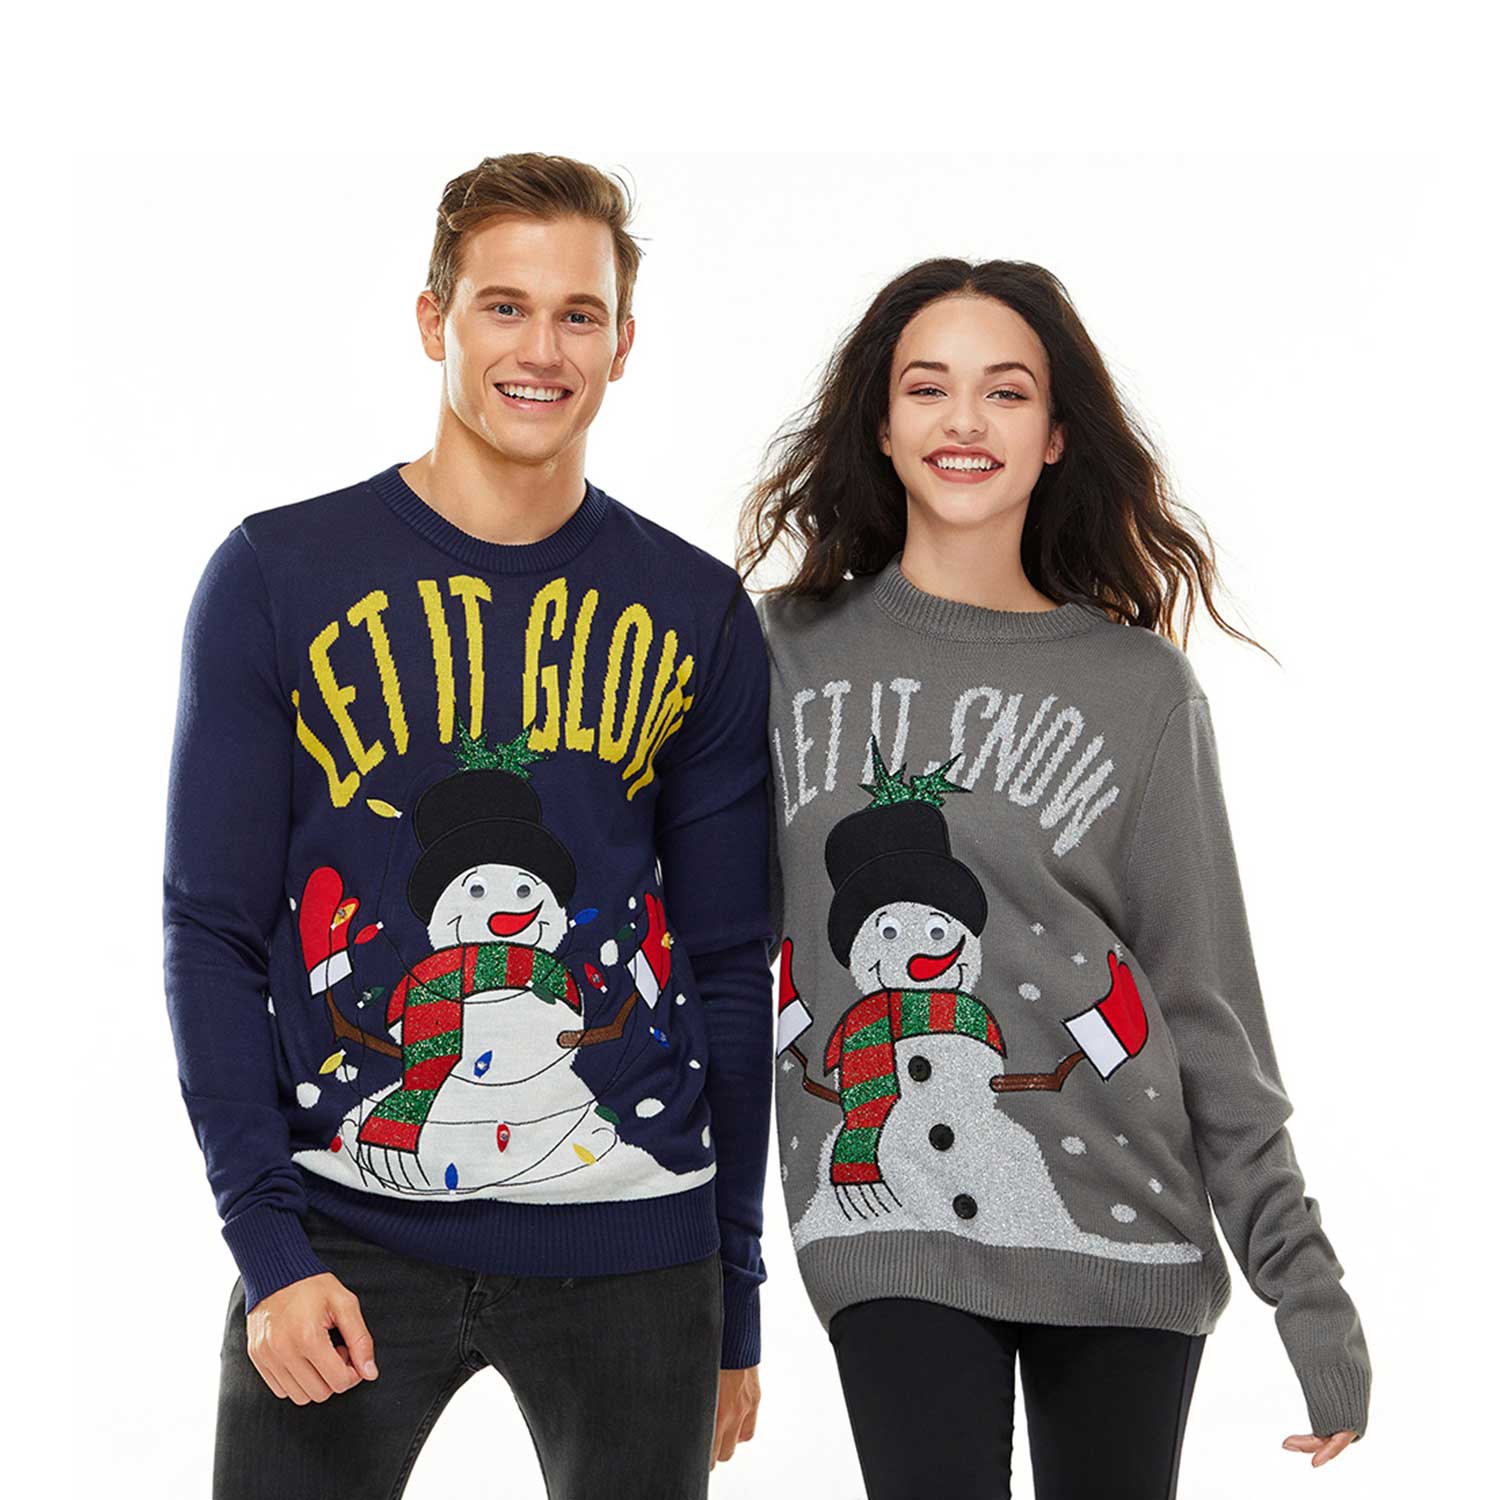 Let it Glow LED in Snow Couples Ugly Christmas Sweater